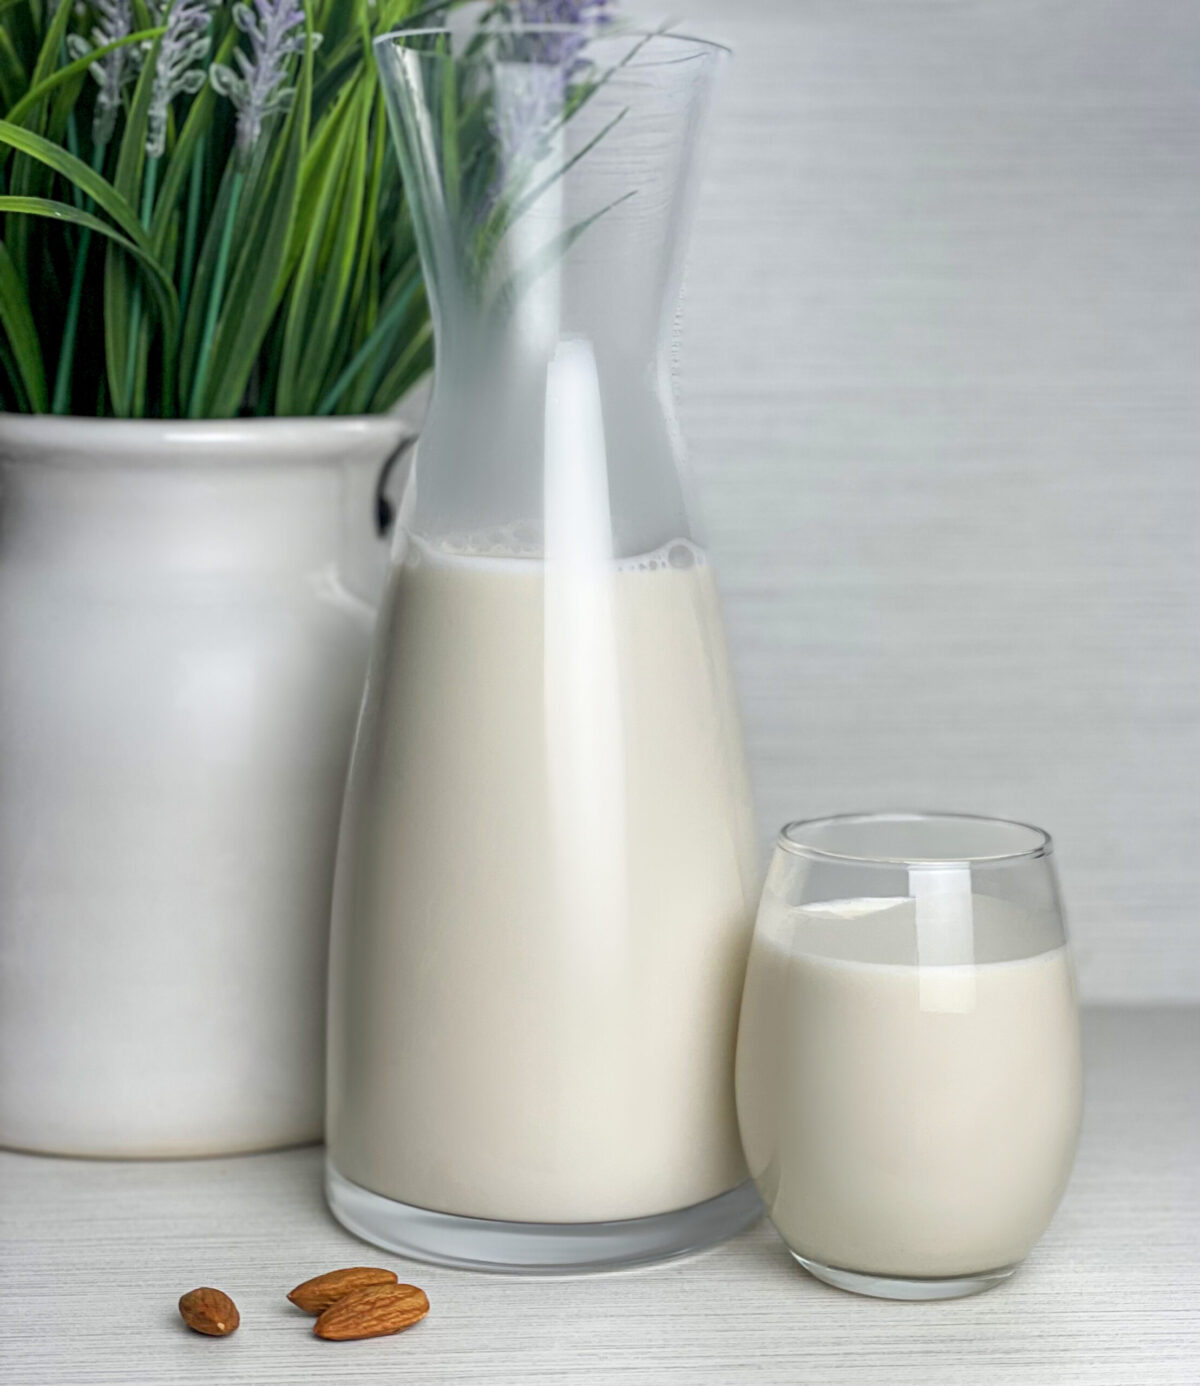 Homemade almond milk in a glass cup next to a carafe on a rustic kitchen table.